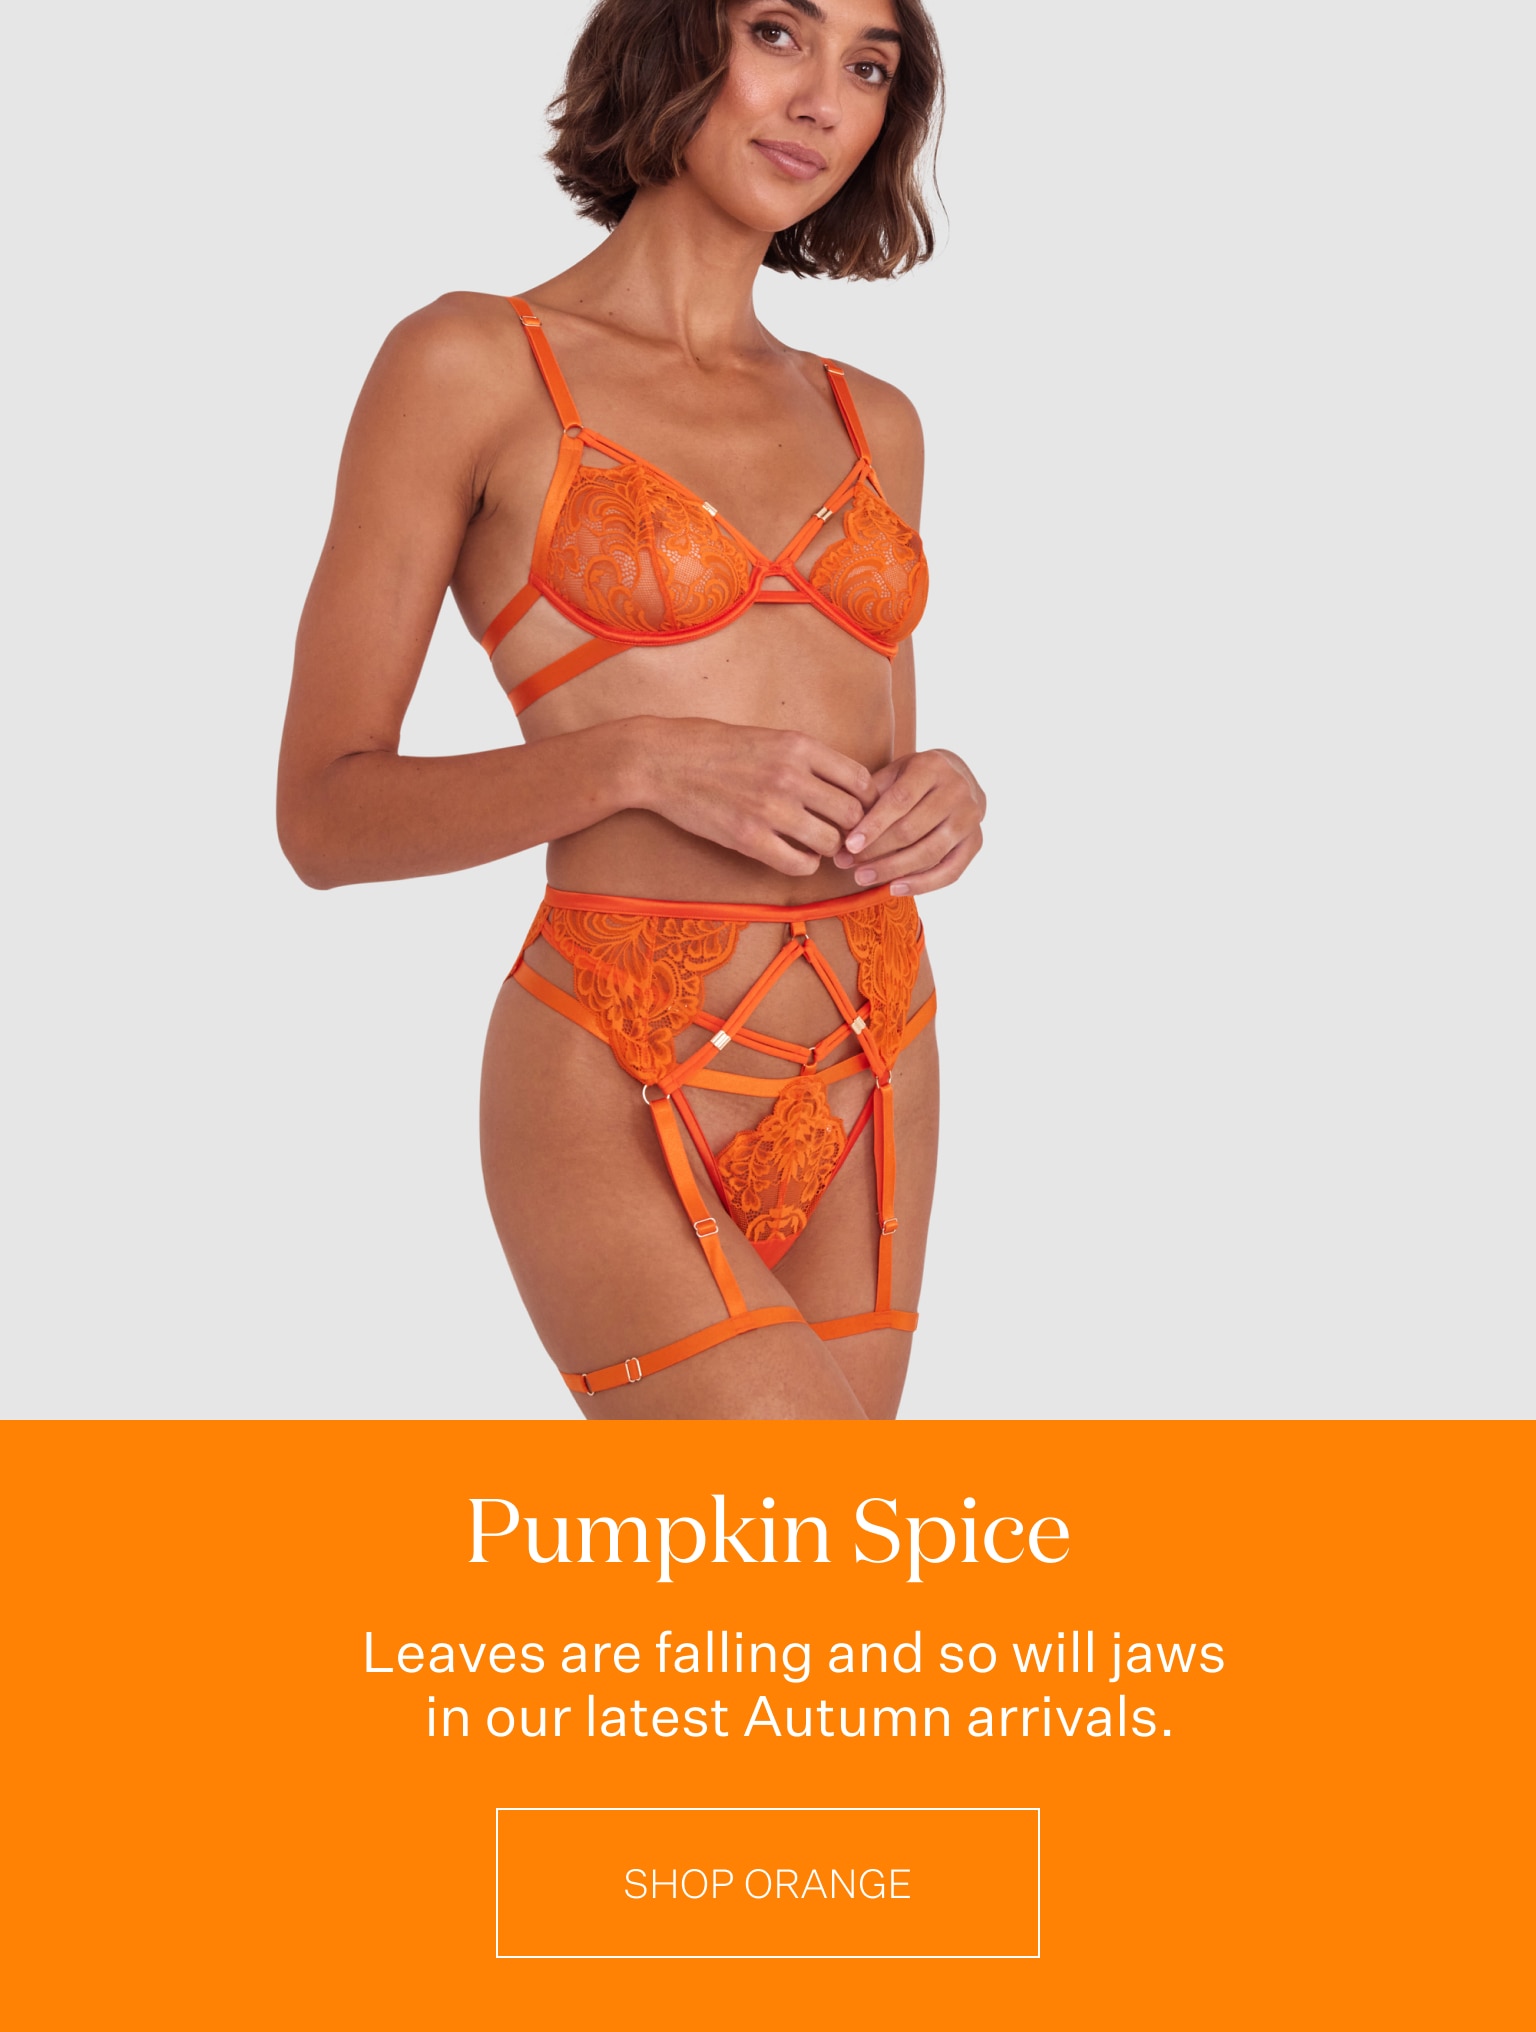 if you've got it, haunt it 🎃  Buy 2 Bras, get a 3rd FREE! - Bras N Things  Email Archive